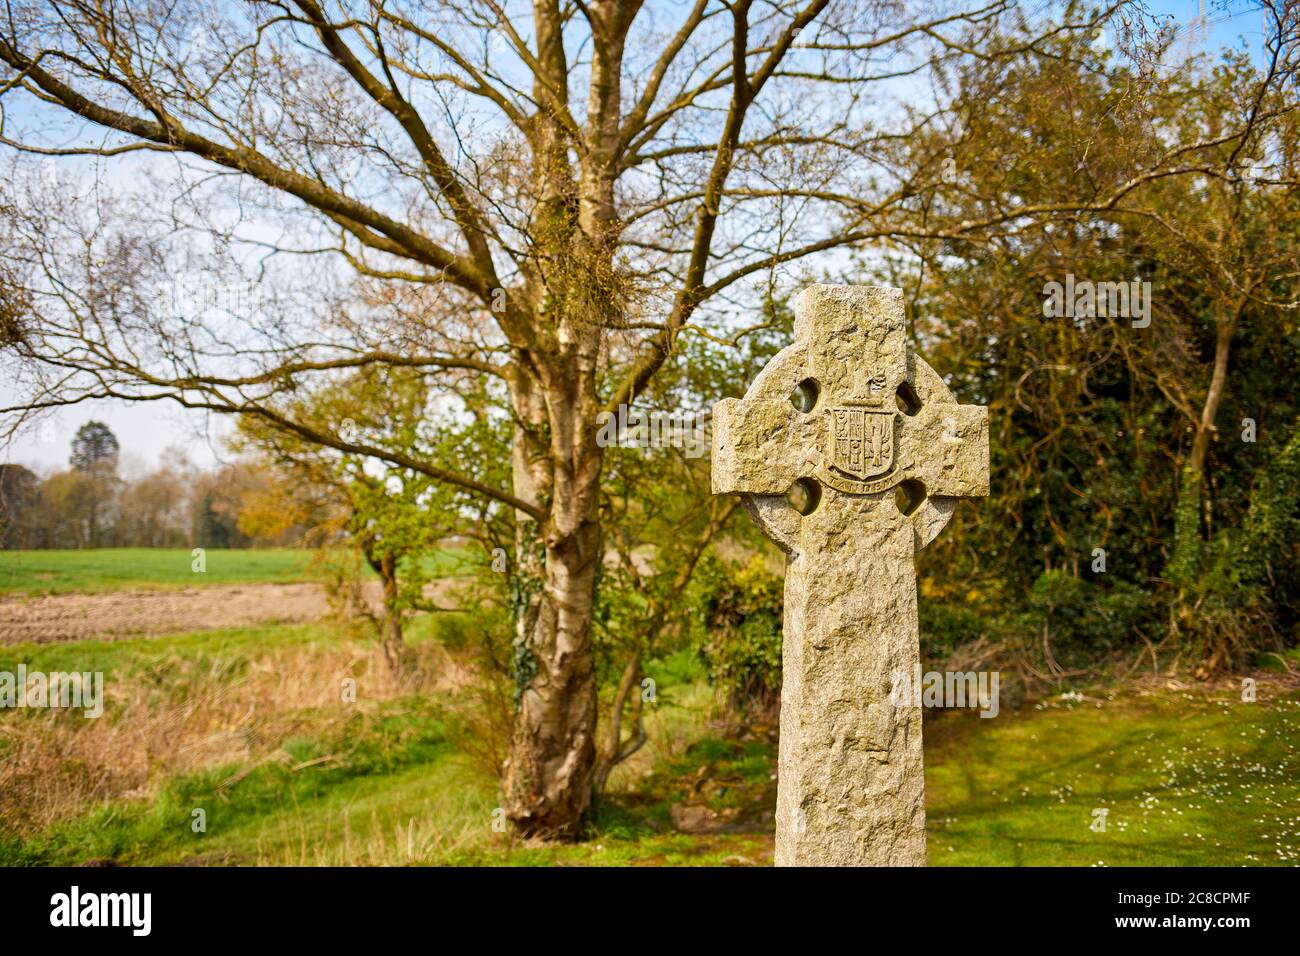 Celtric stone cross with shield emblem Stock Photo